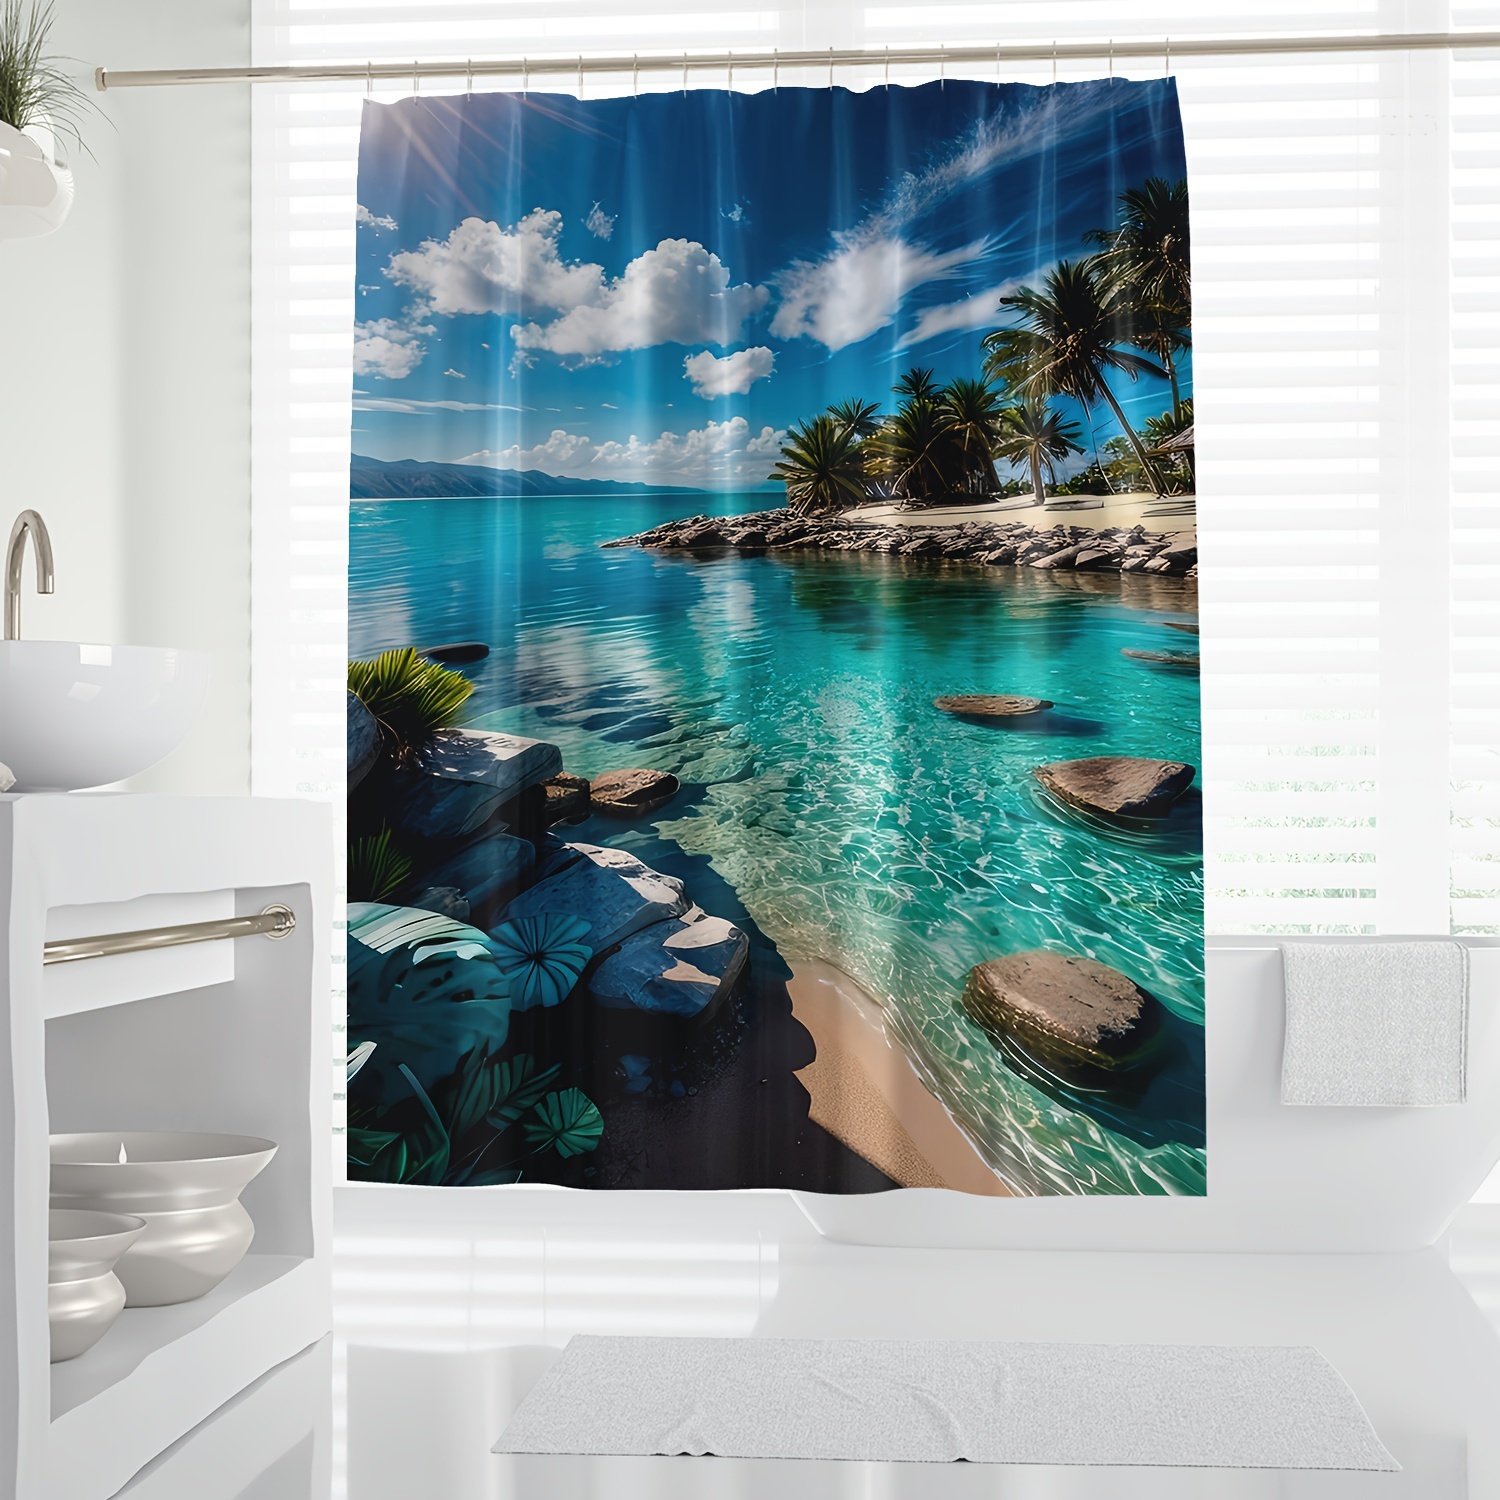 

Coastal Bliss: 1pc Waterproof Shower Curtain With Beach & Seaside Print, Includes Hooks - Perfect For All Seasons Shower Curtain Set Shower Curtain Hooks